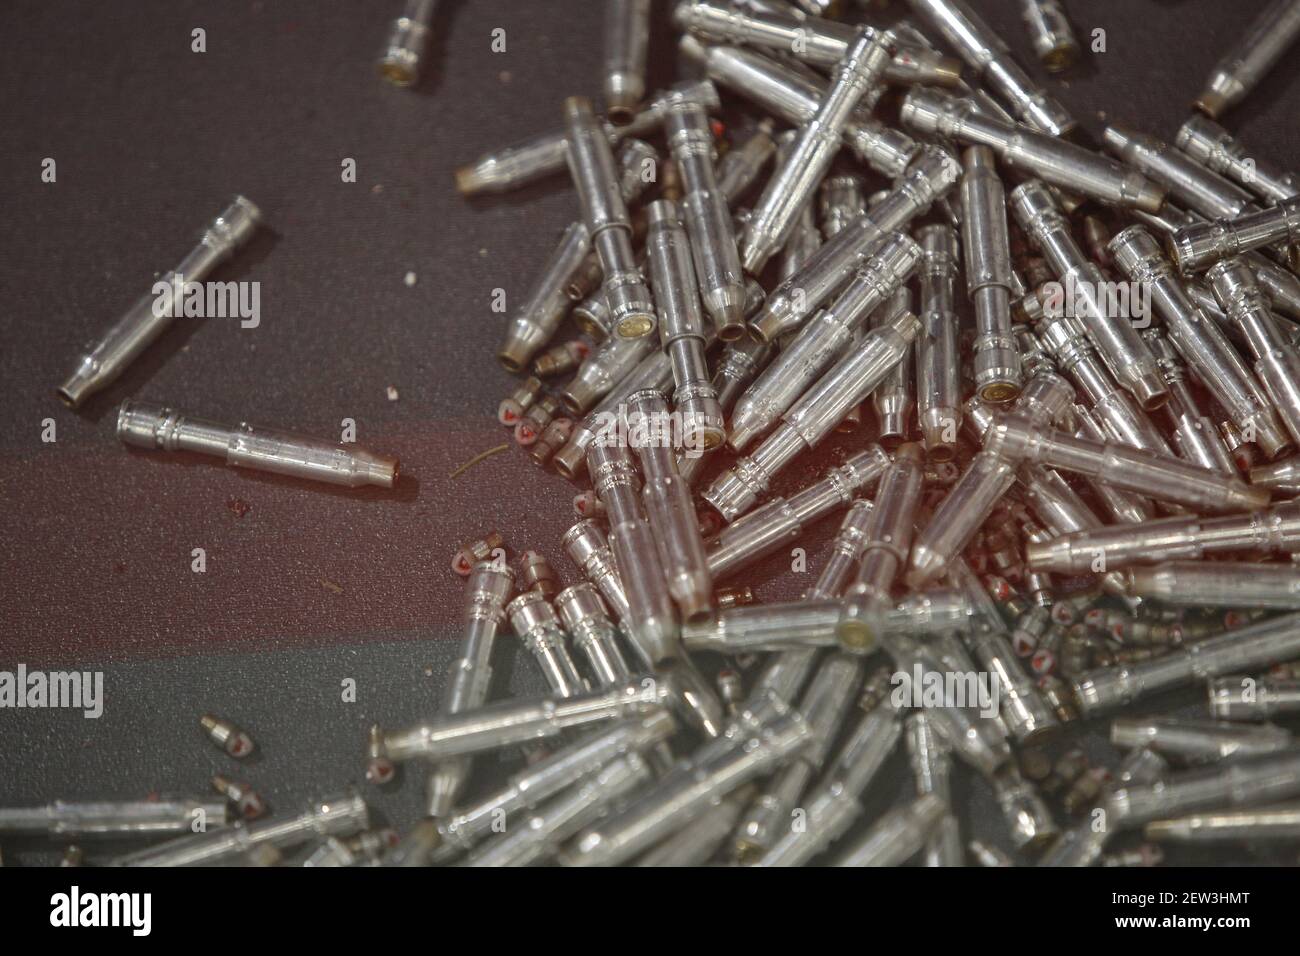 Bullet casings from the Polish made Grot automatic rifle are seen at the 25th International Defence Industry Exhibition in Kielce, Poland on September 8, 2017. The Kielce exhibition is the largest of its kind in Central and Eastern Europe. (Photo by Jaap Arriens/Sipa USA) Stock Photo